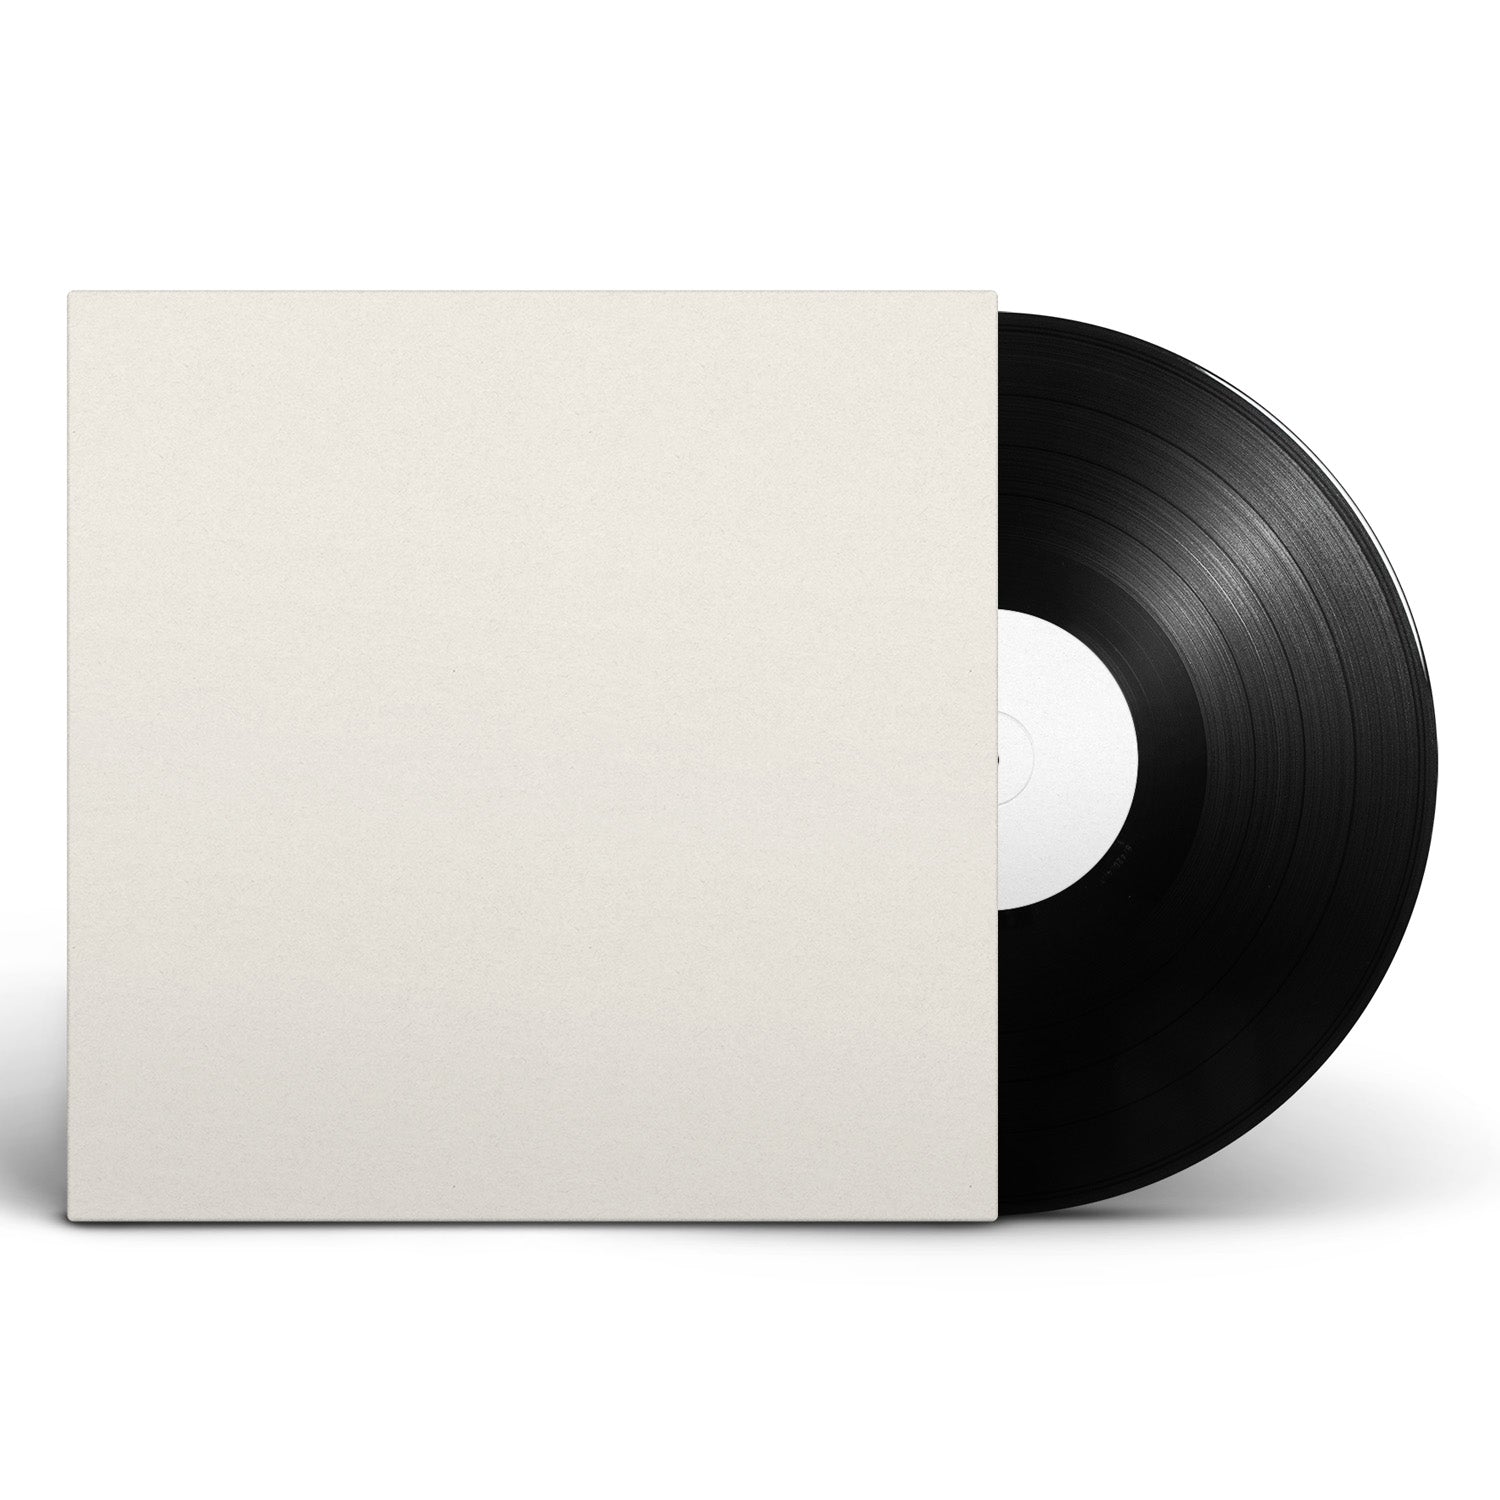 Ben Folds - What Matters Most [SIGNED Test Pressing]